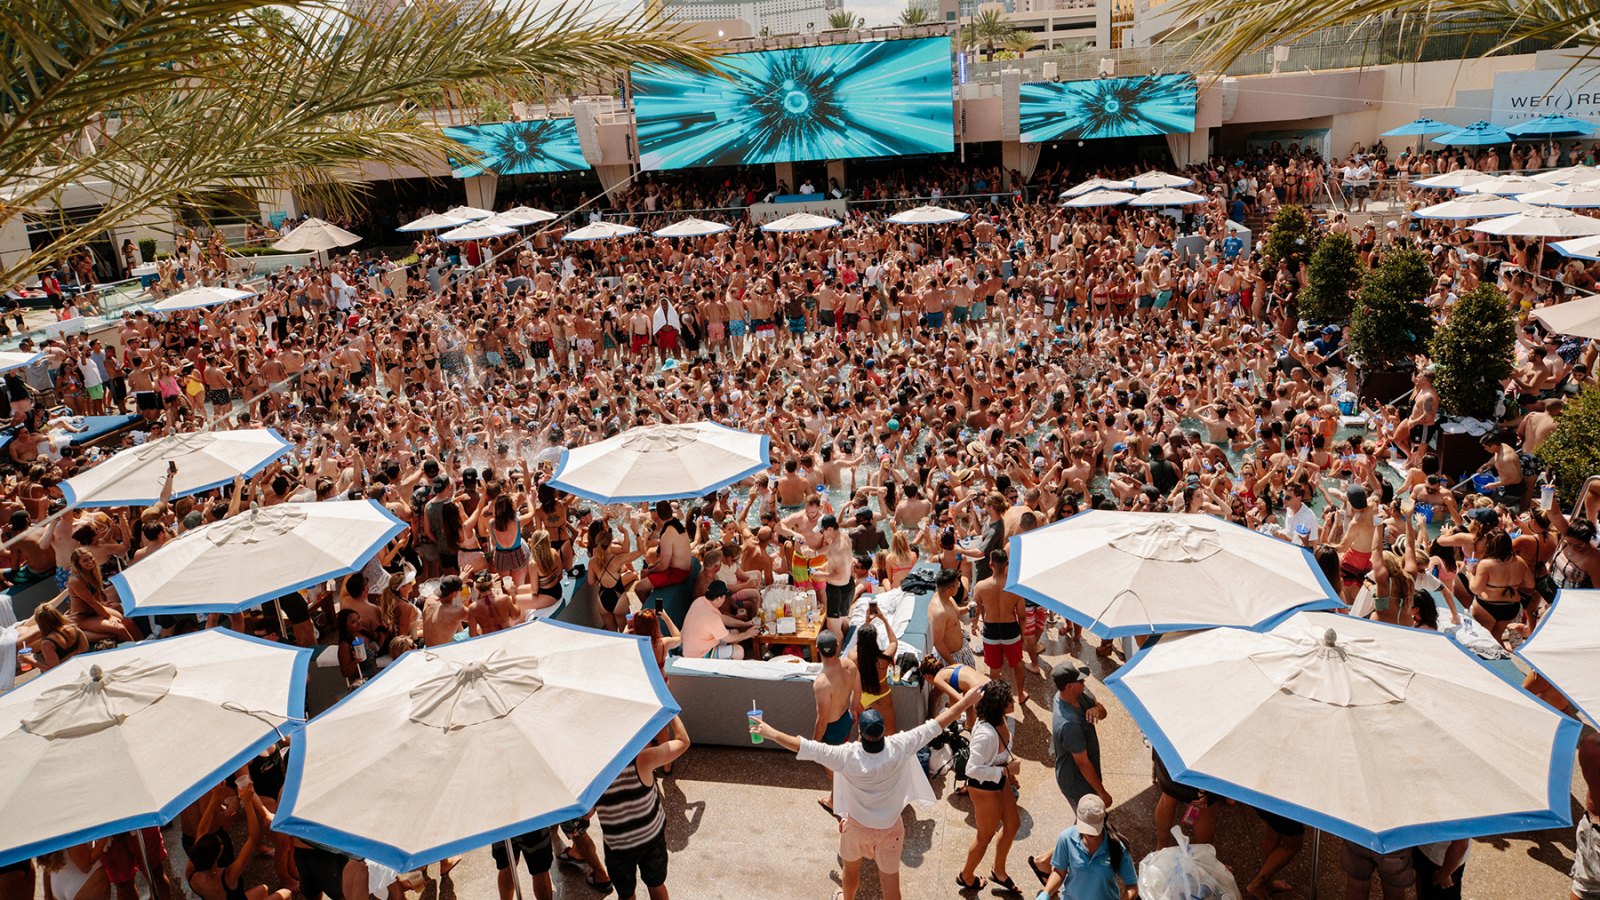 By day, Vegas parties in its pools